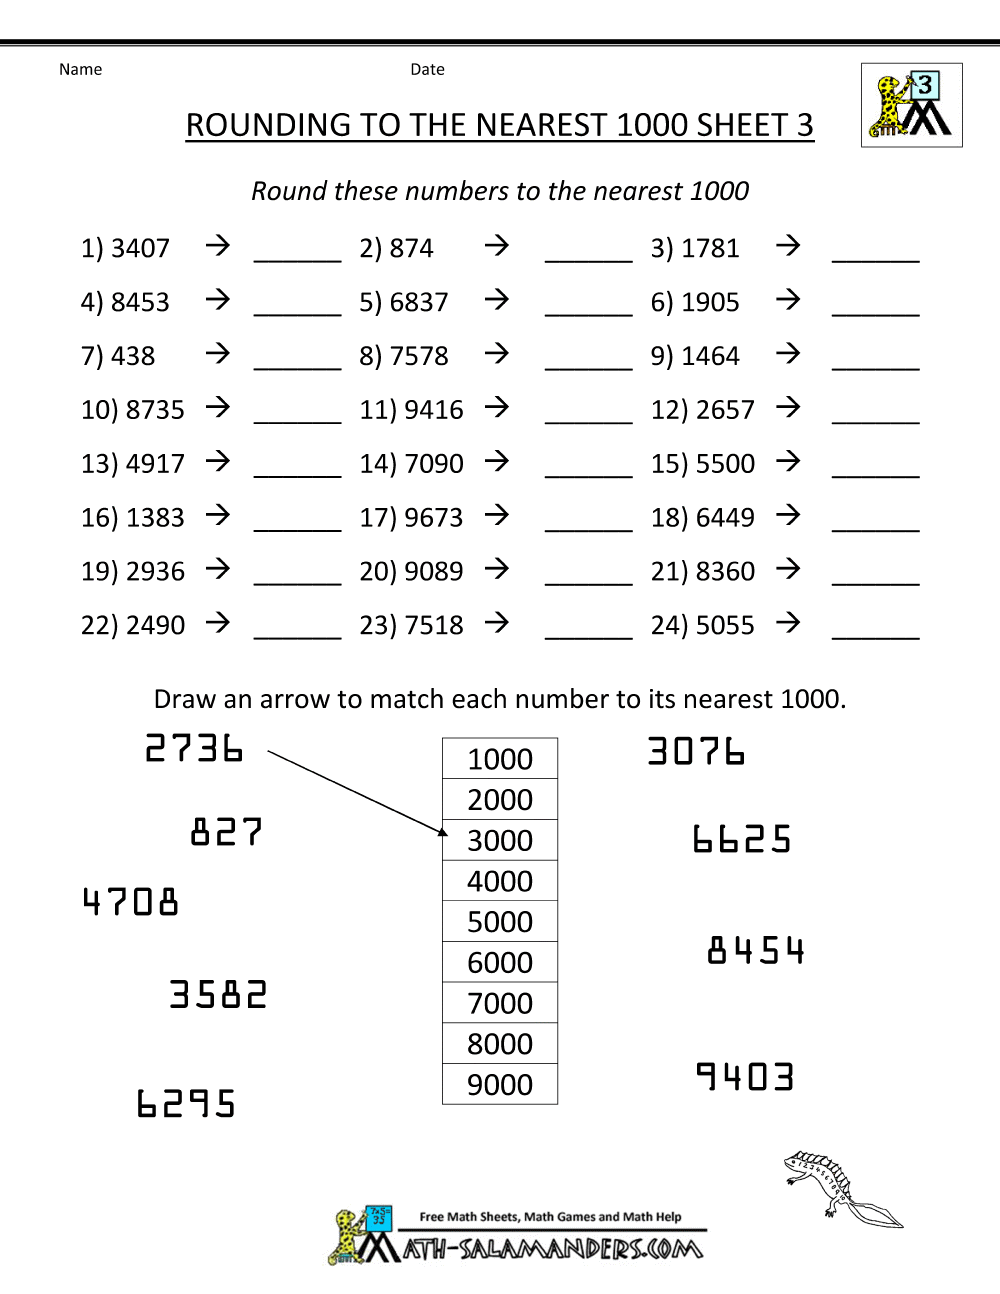 Rounding Worksheet To The Nearest 1000